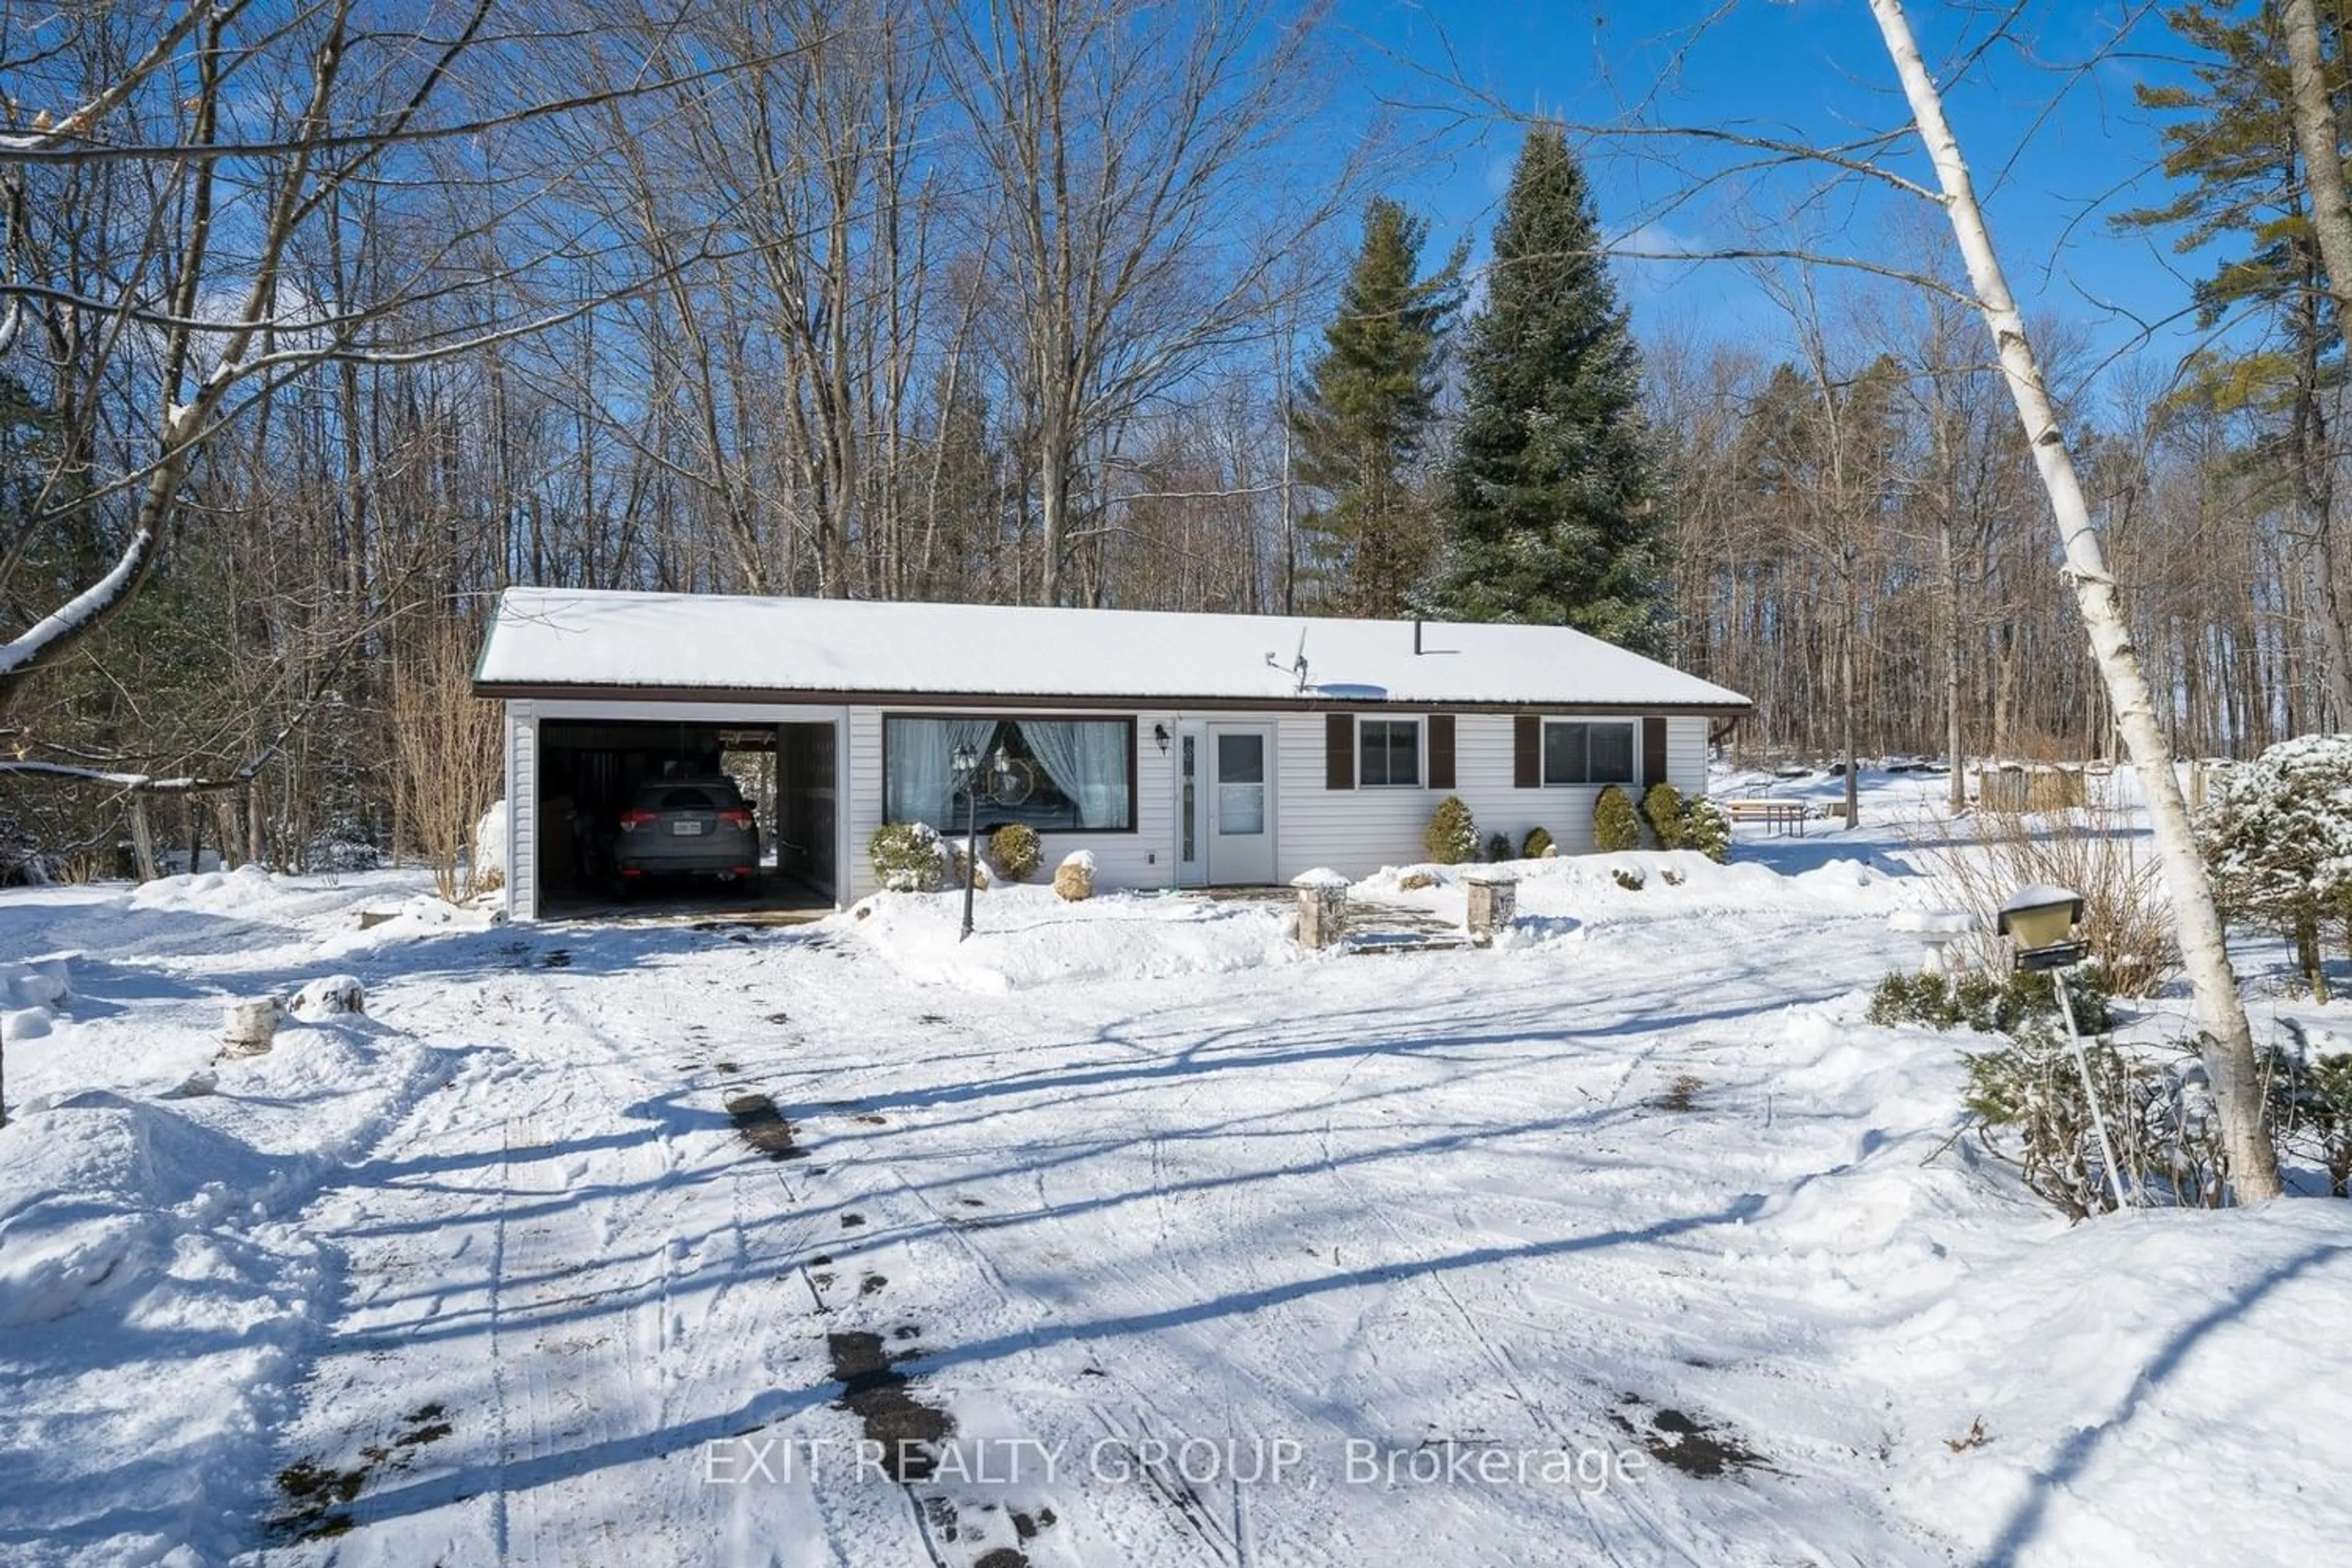 Home with unknown exterior material for 131 Booster Park Rd, Marmora and Lake Ontario K0K 2M0